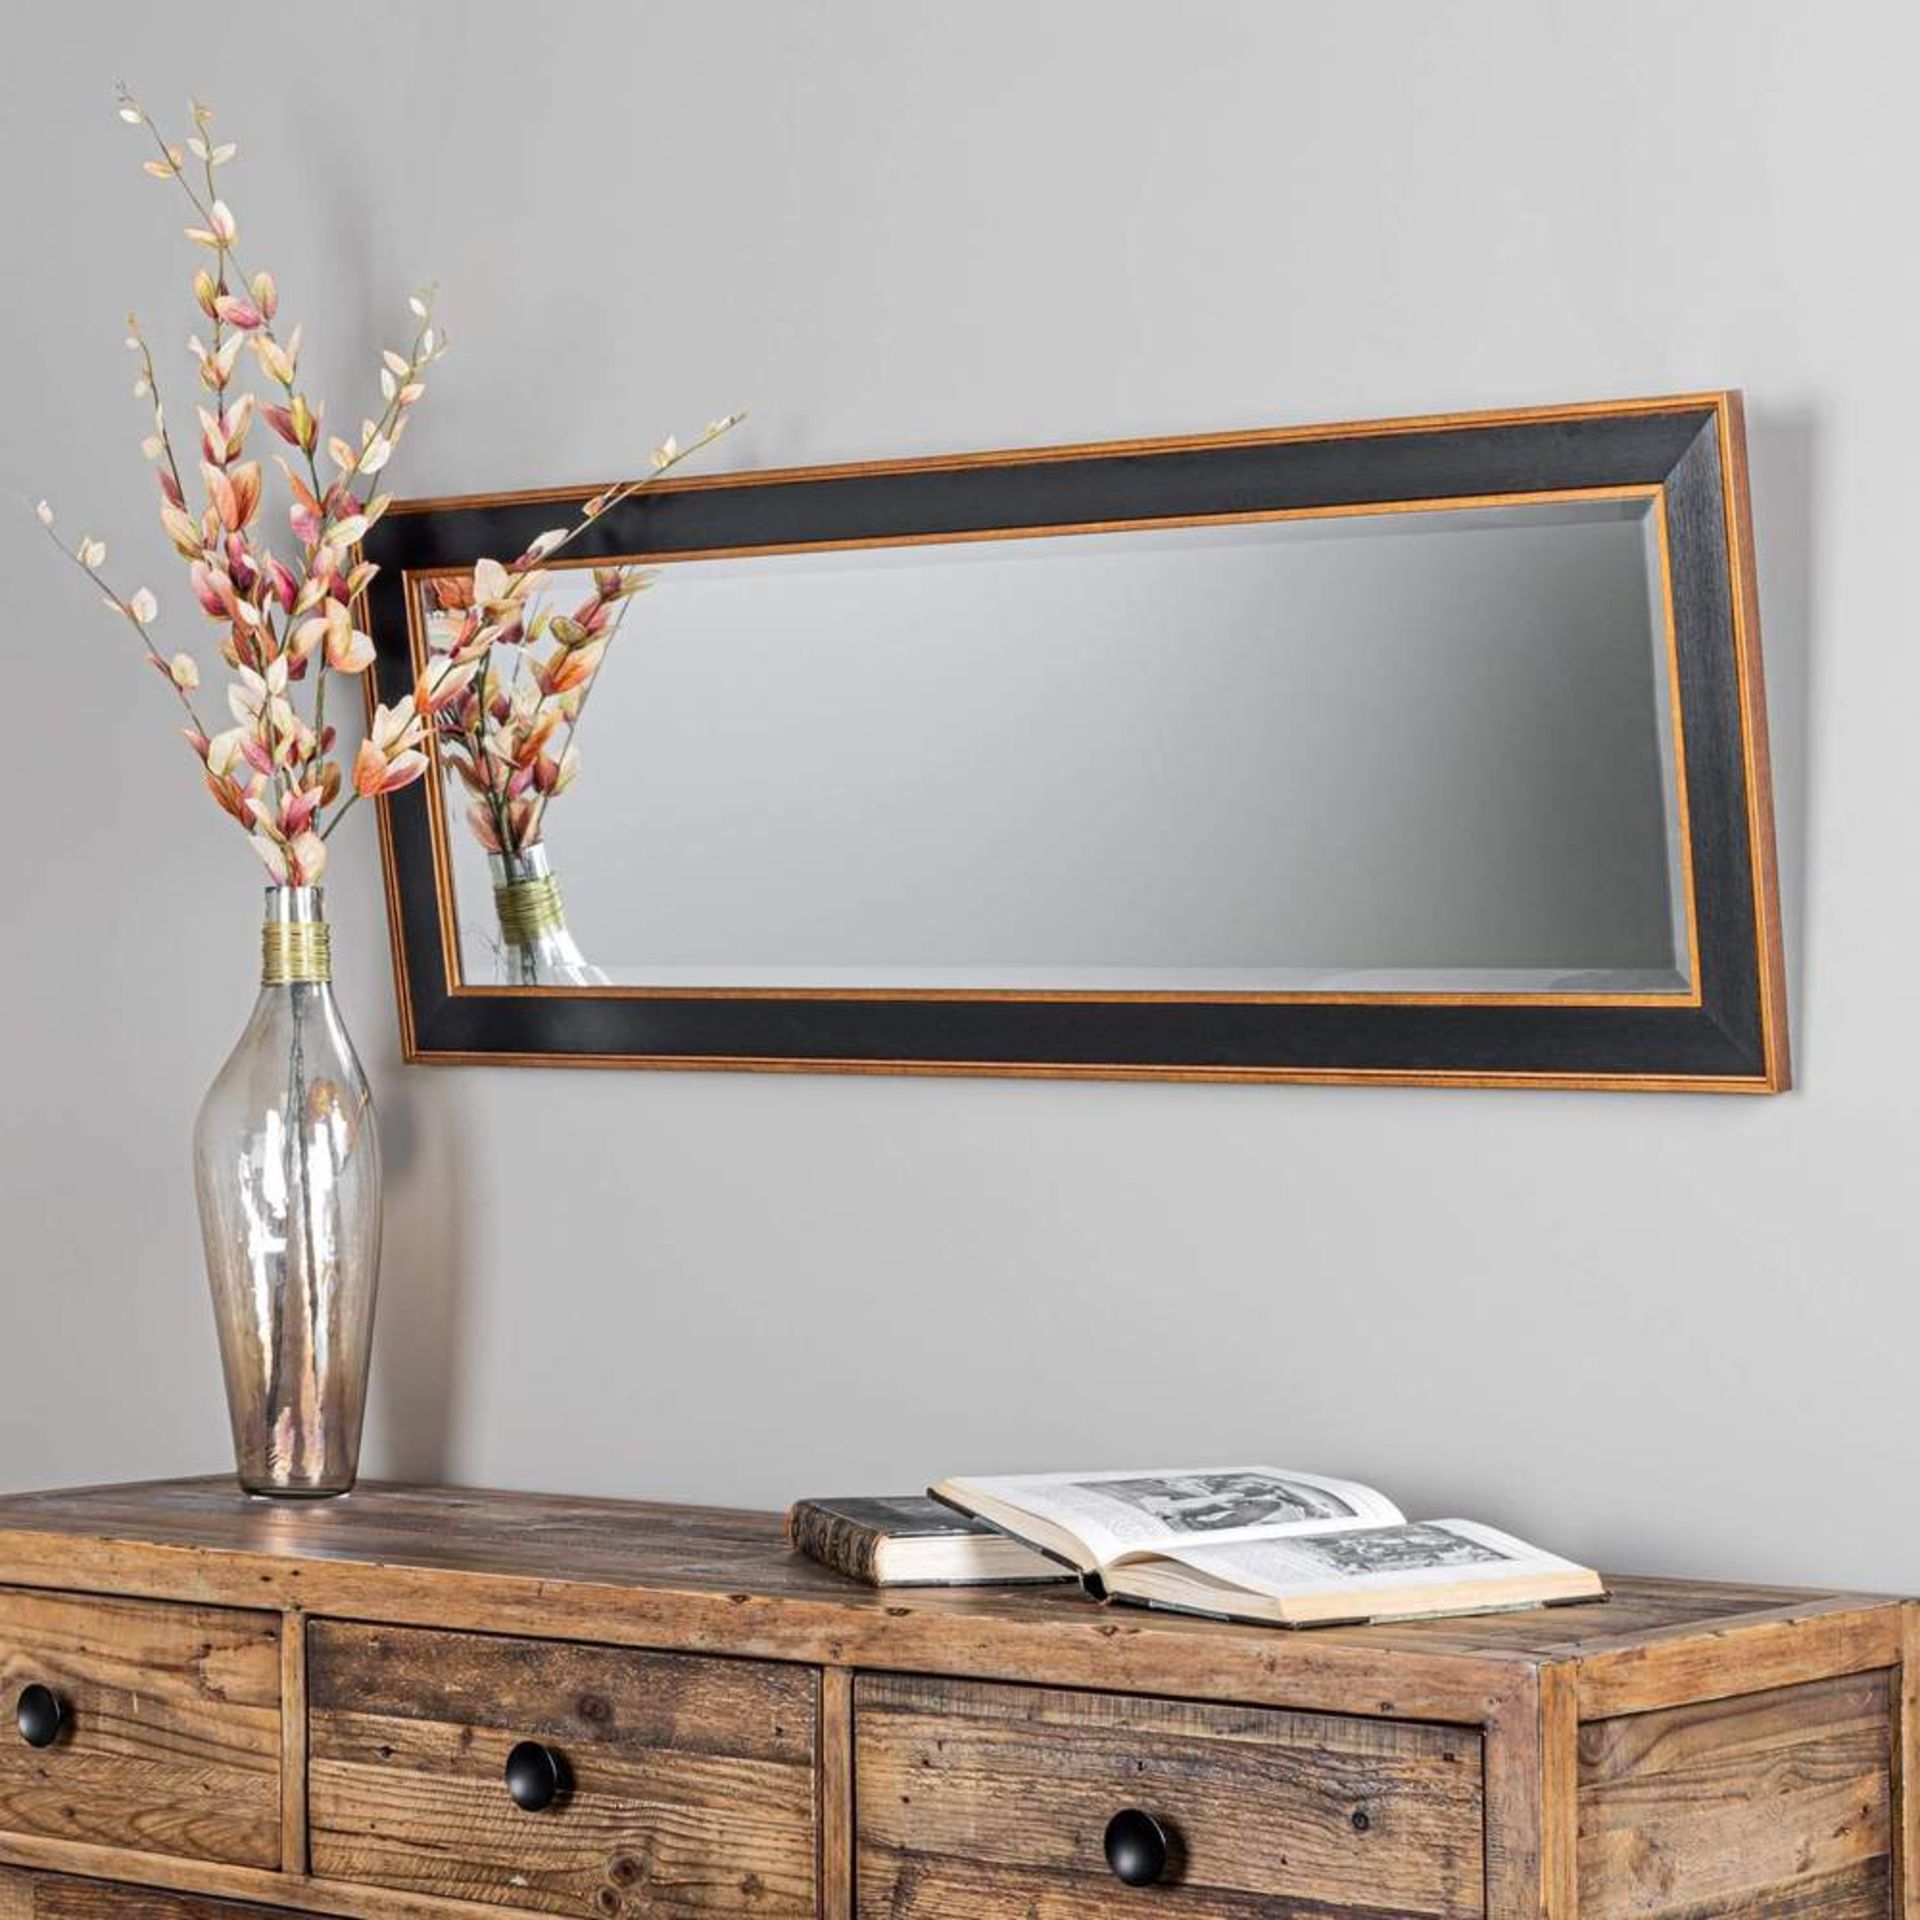 Daltry Mirror Black Leaner This Piece Is Simple But Effective With It's Minimalist Charm And Smart